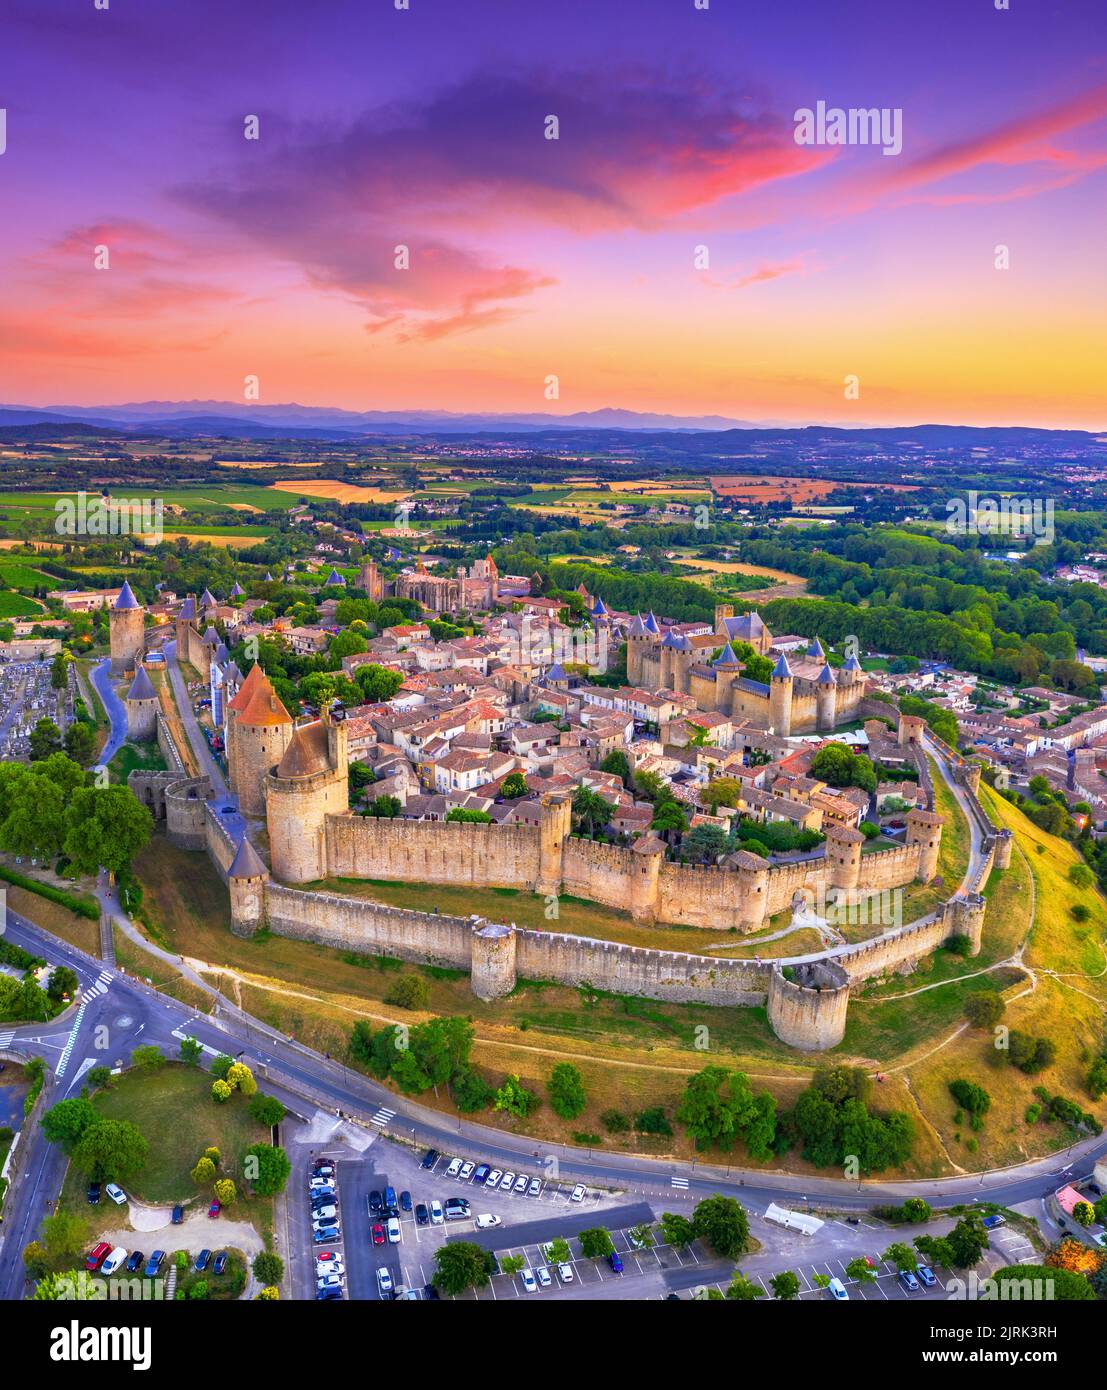 Medieval castle town of Carcassone at sunset, France Stock Photo